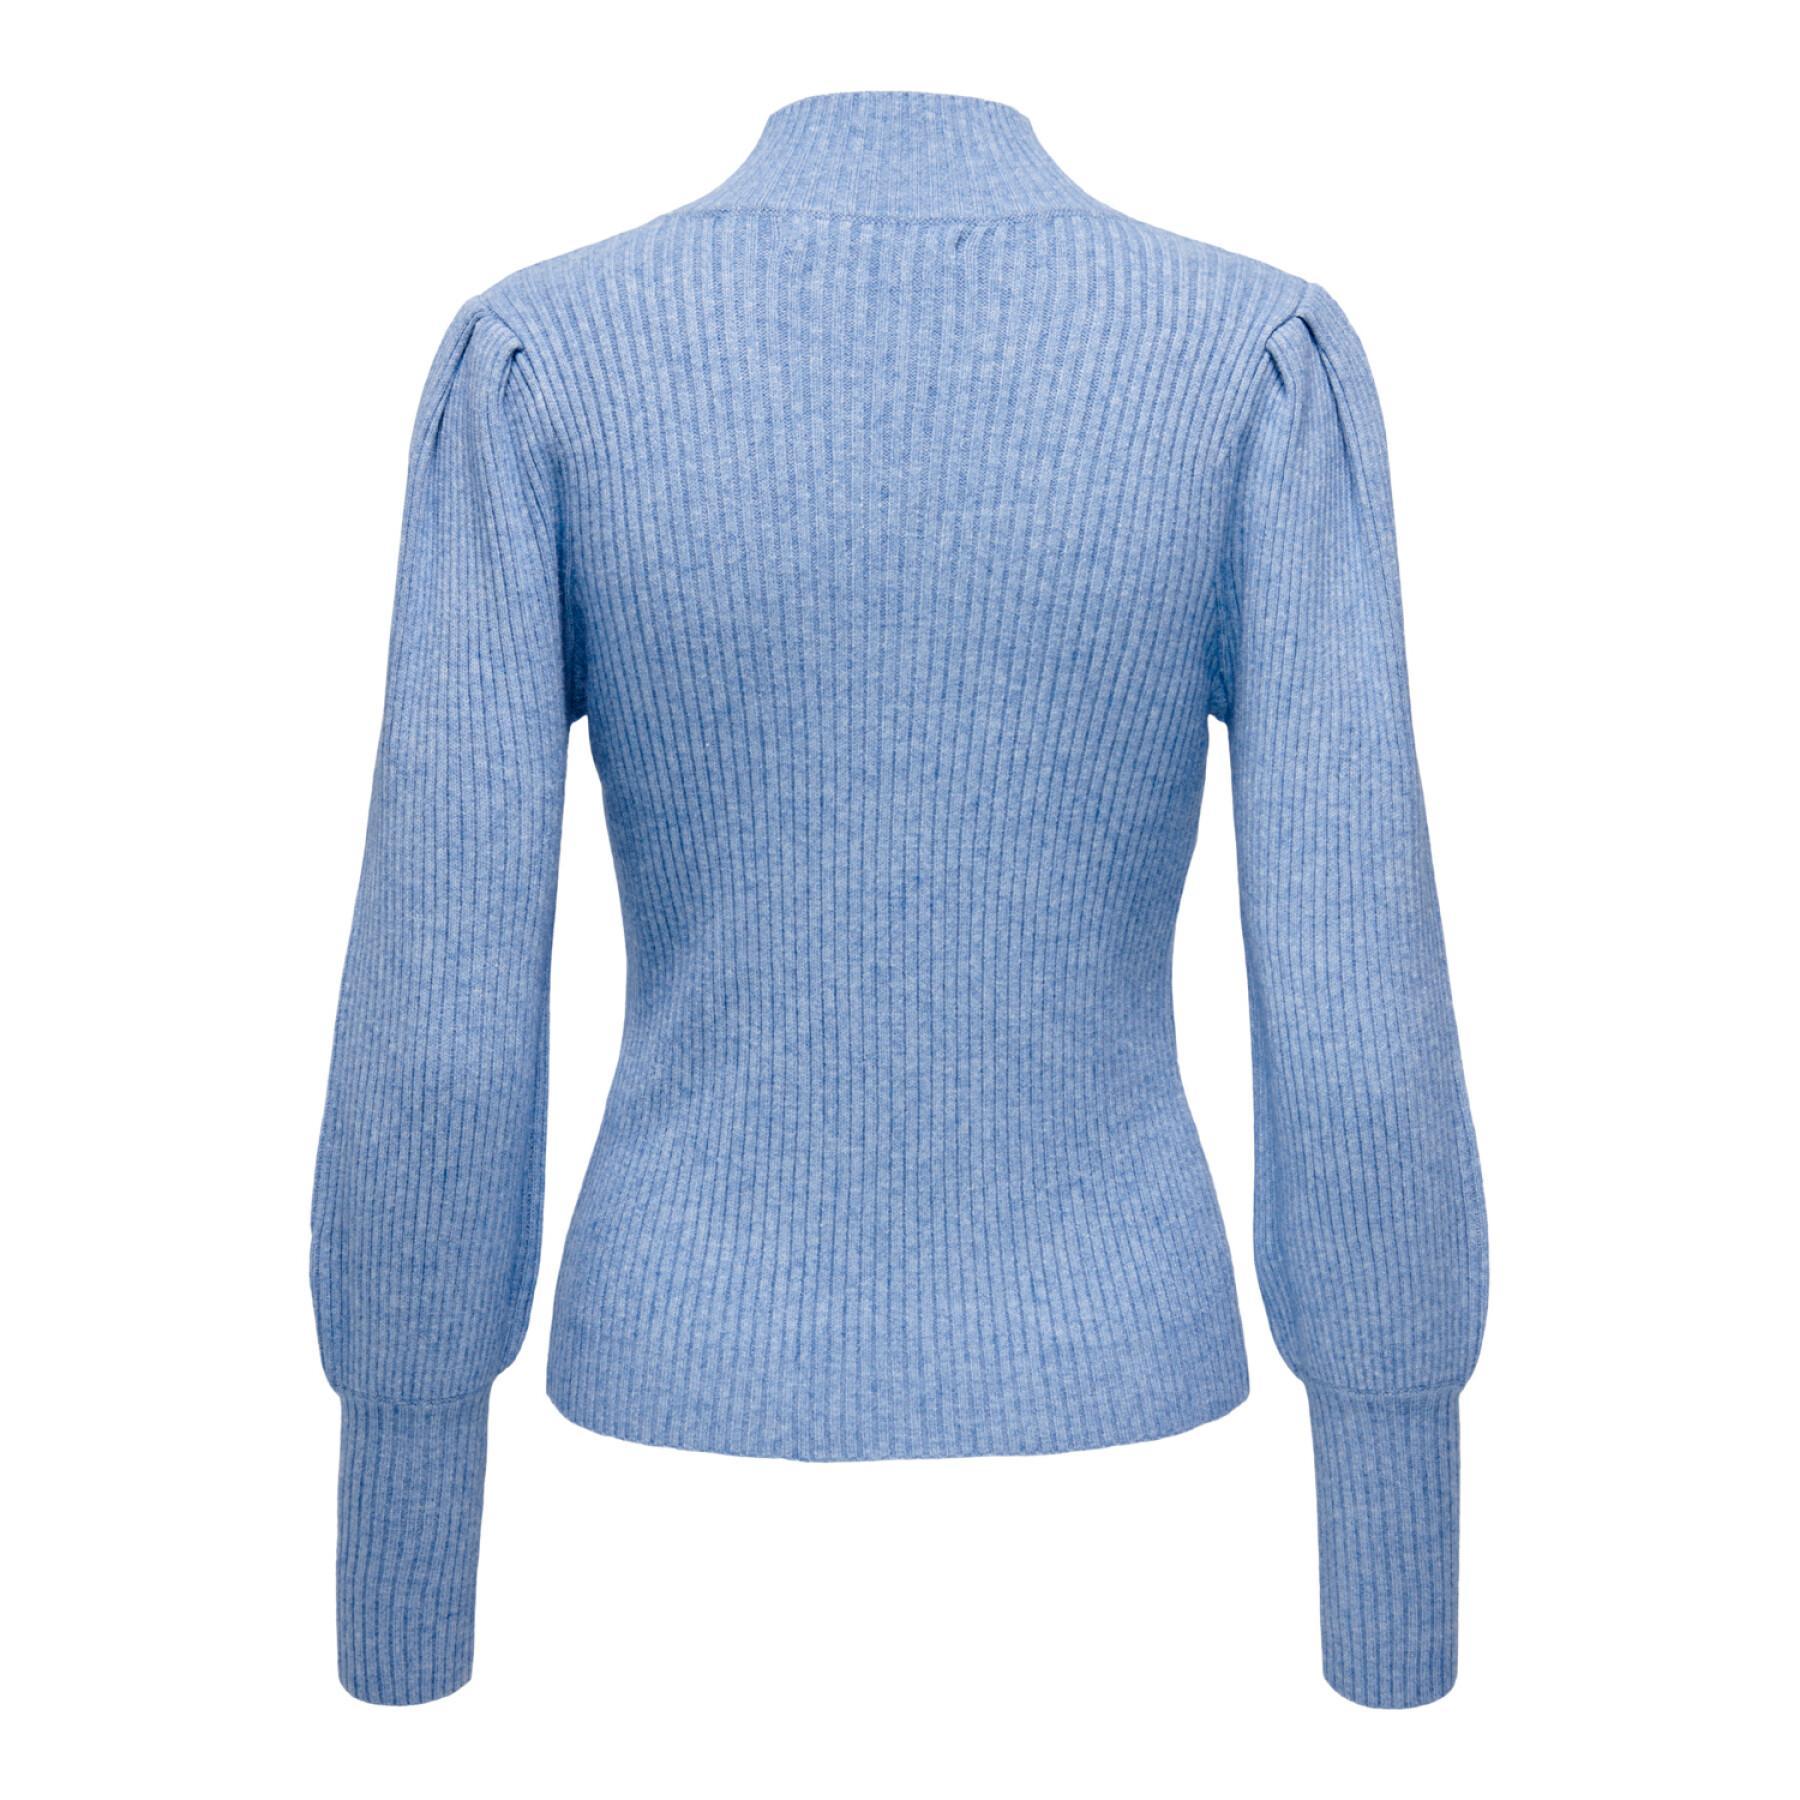 Women's stand-up collar sweater Only Katia